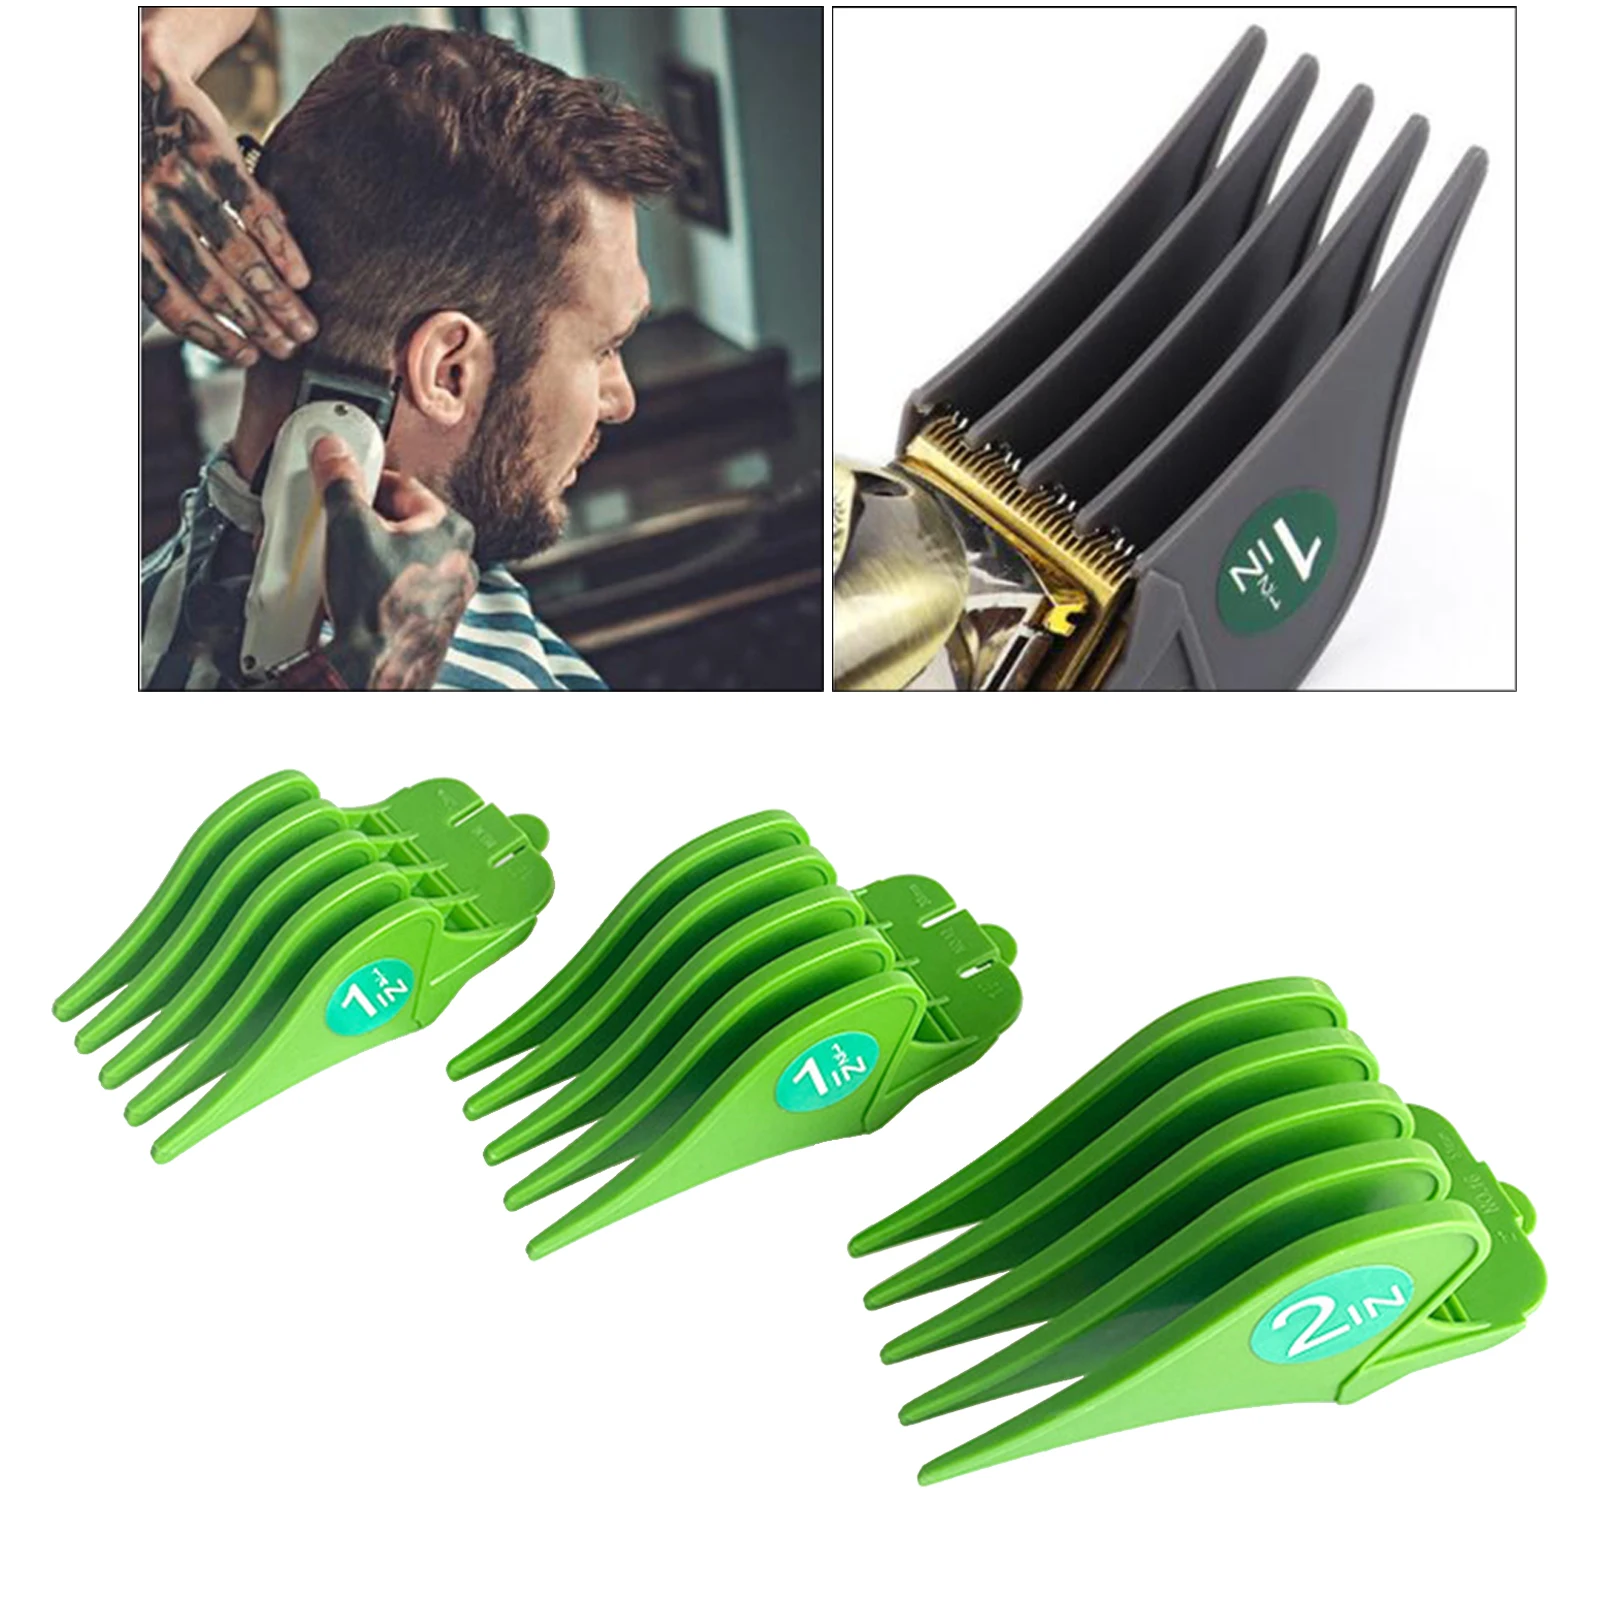 3Pcs Professional Hair Trimmer Clipper Guard Combs Guide Combs Cutting Guides Combs for Hair Clippers/Trimmers Attachment